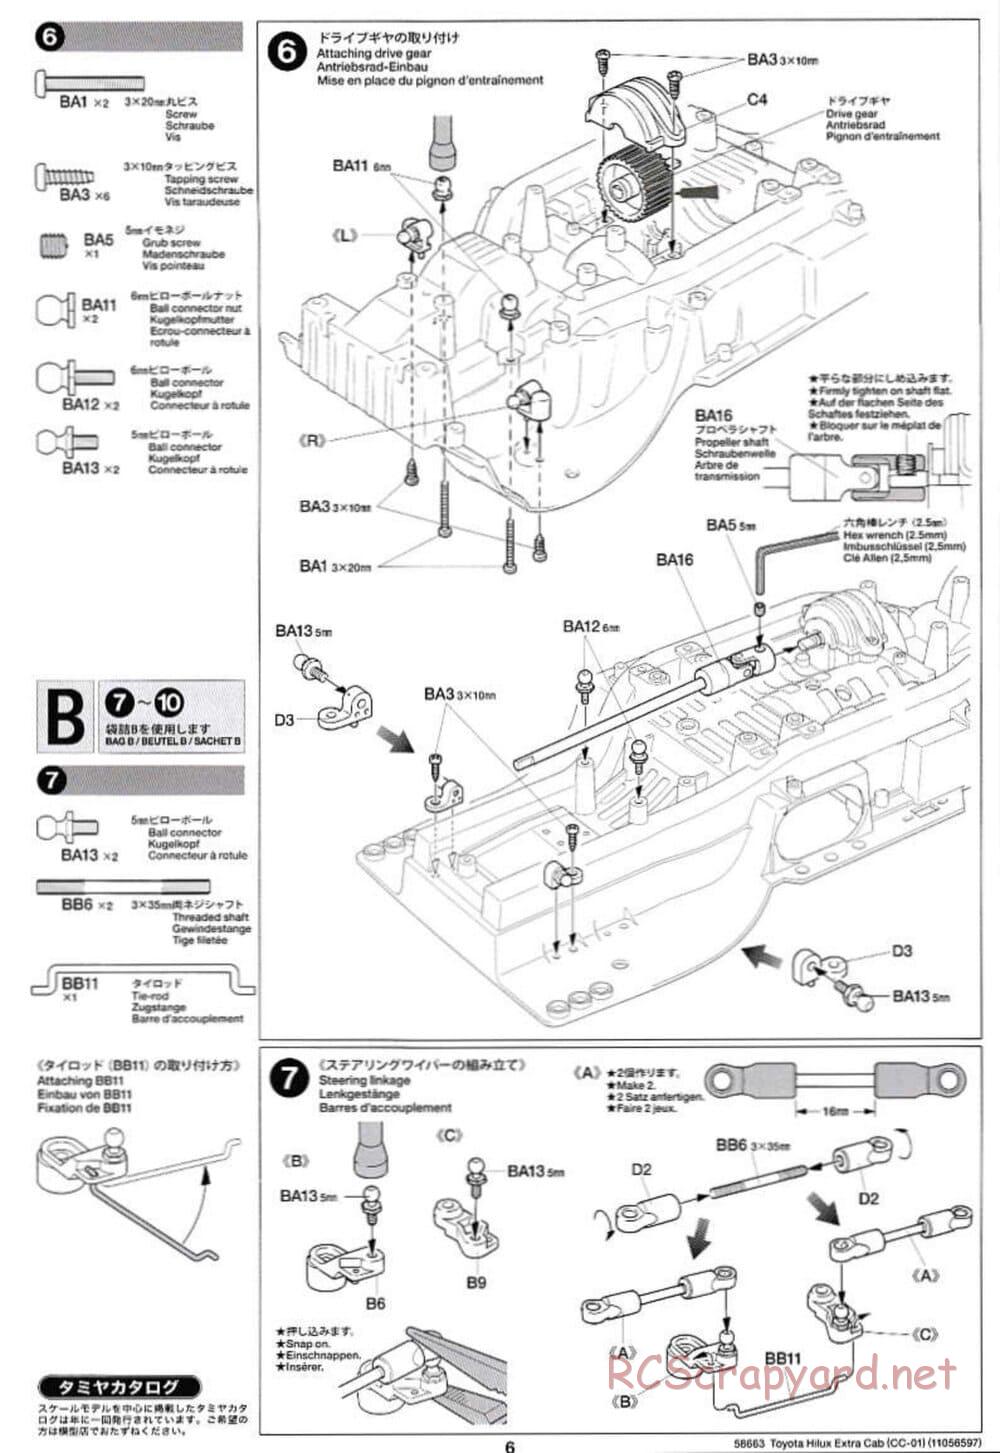 Tamiya - Toyota Hilux Extra Cab - CC-01 Chassis - Manual - Page 6